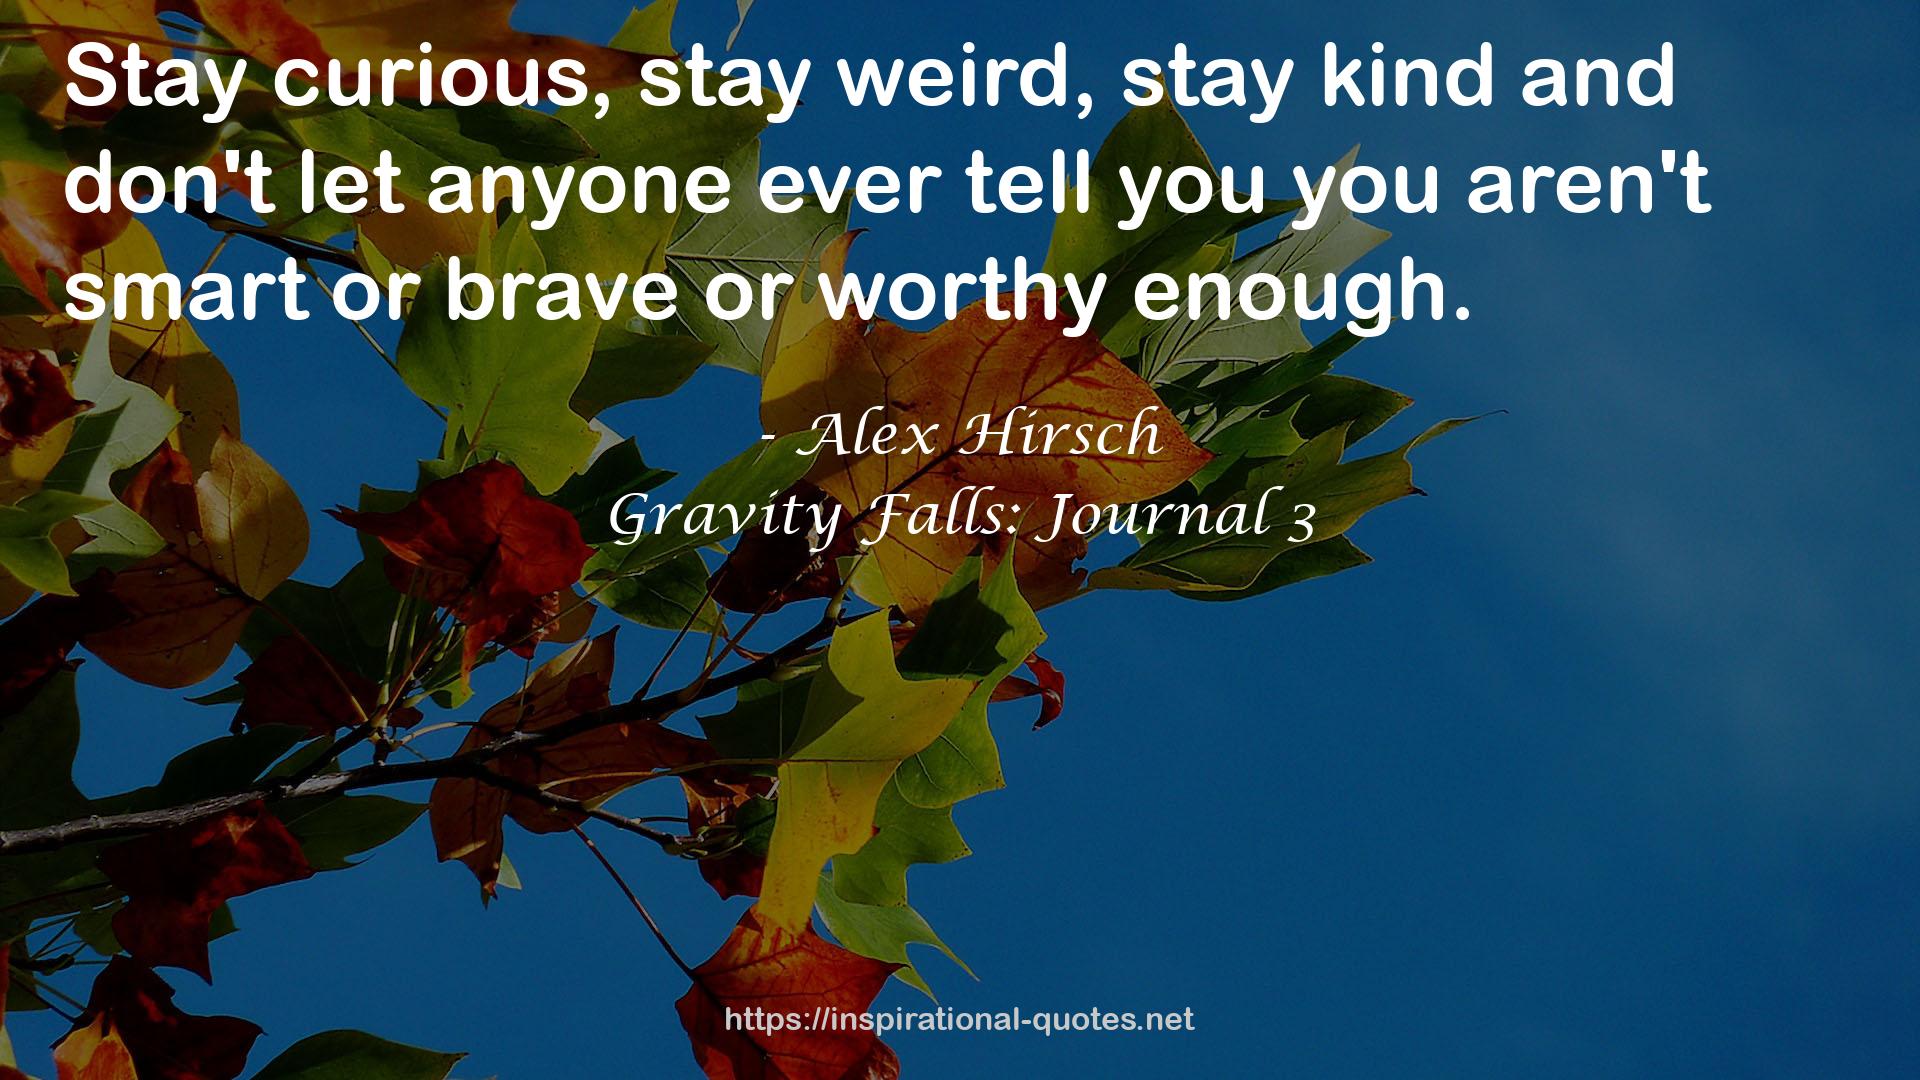 Gravity Falls: Journal 3 QUOTES